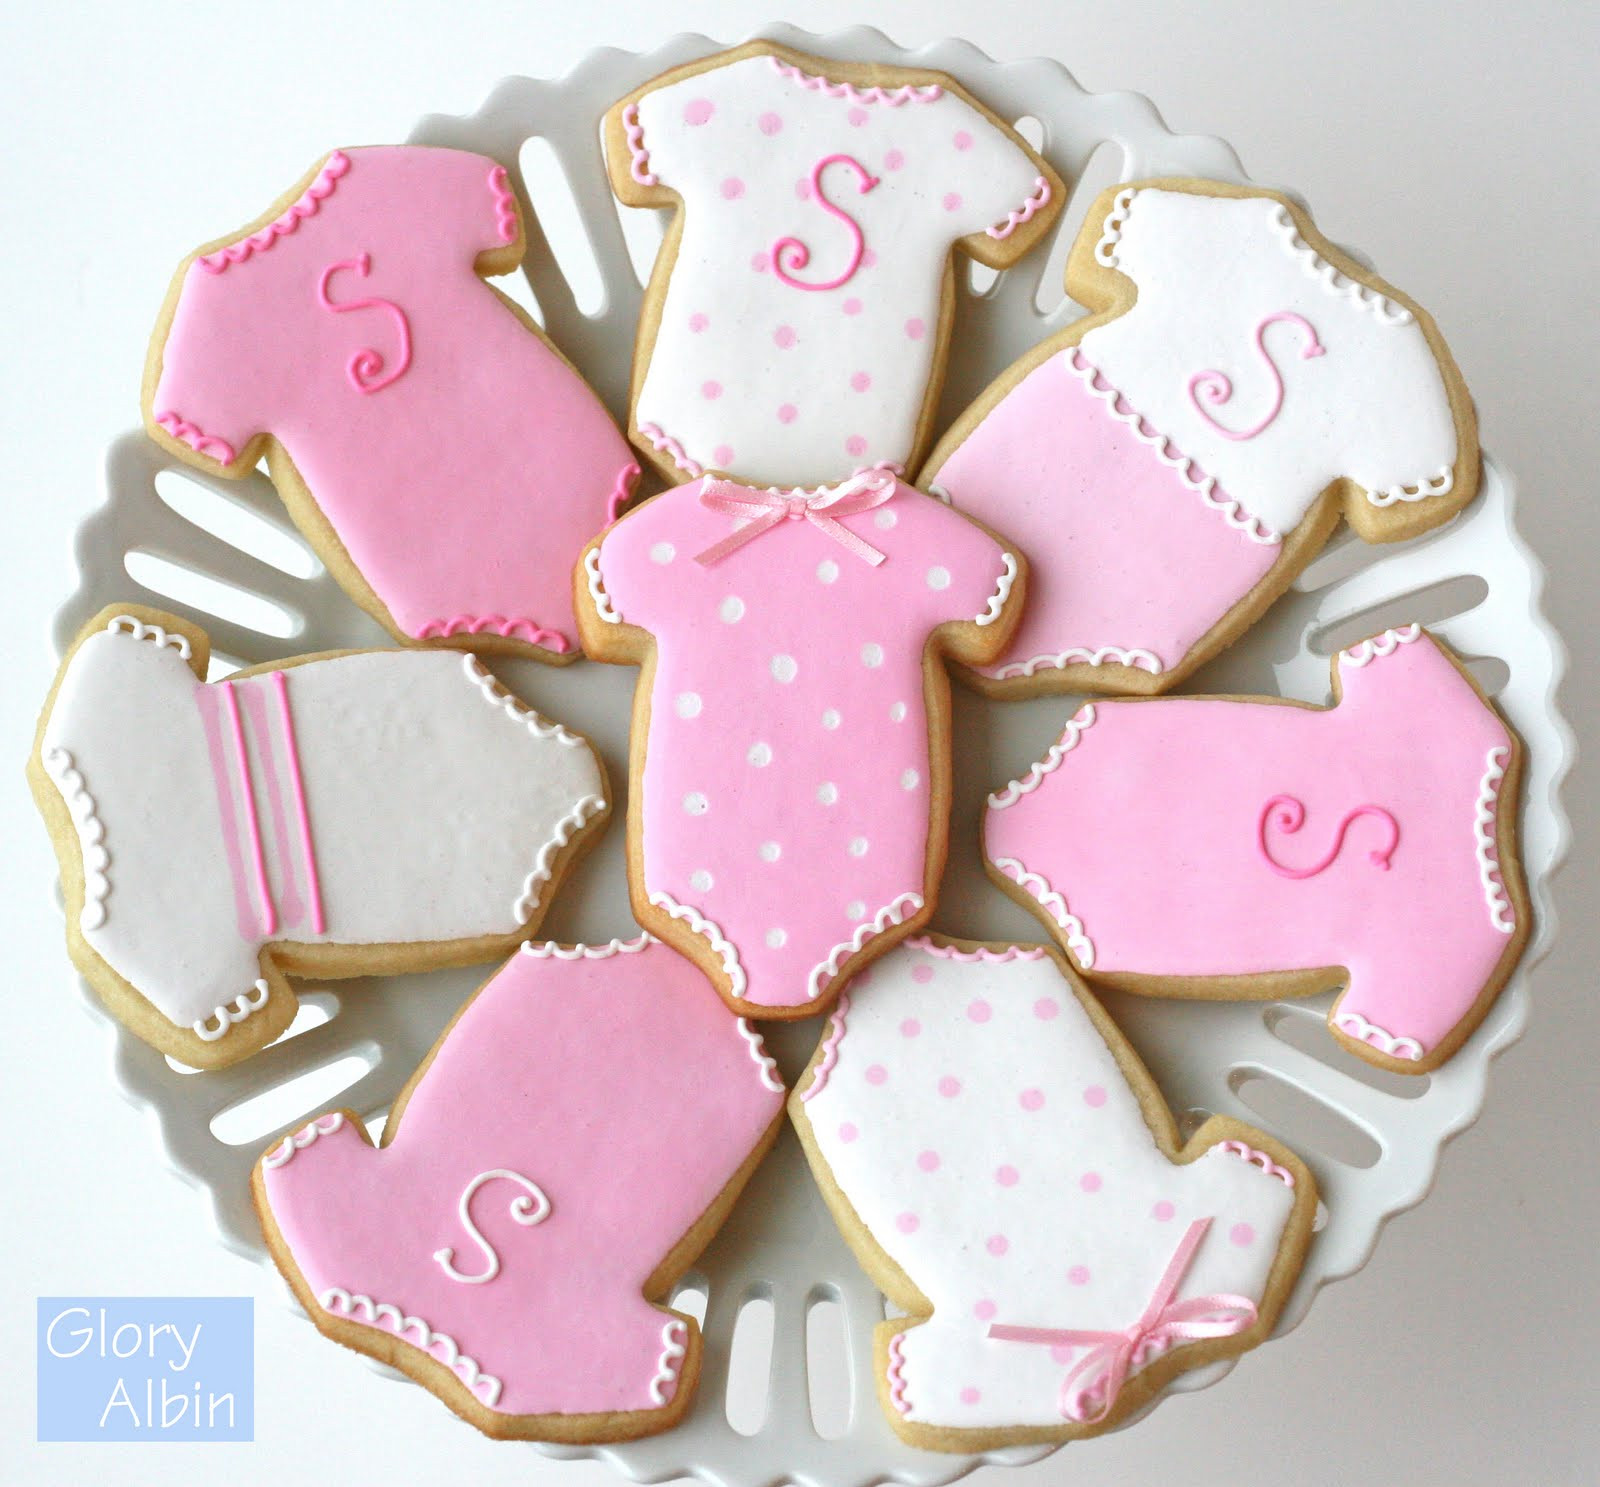 Decorated Sugar Cookies
 Decorating Sugar Cookies with Royal Icing – Glorious Treats